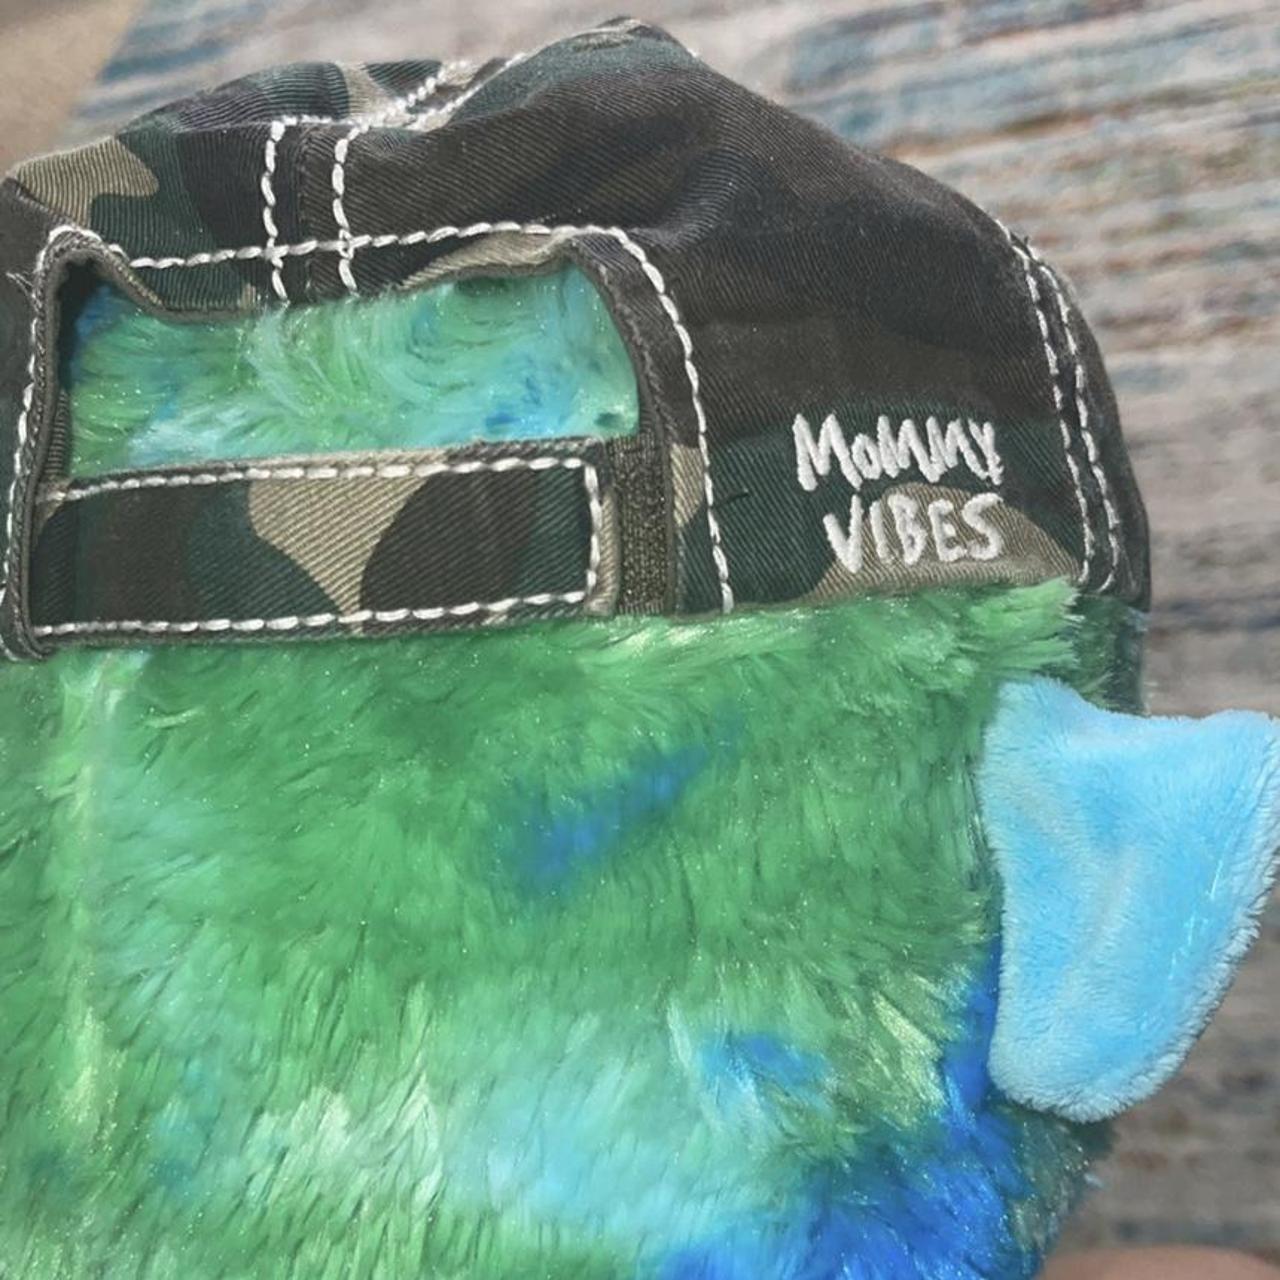 Product Image 2 - MOMMY VIBES Y2K CAMO HAT!!
i